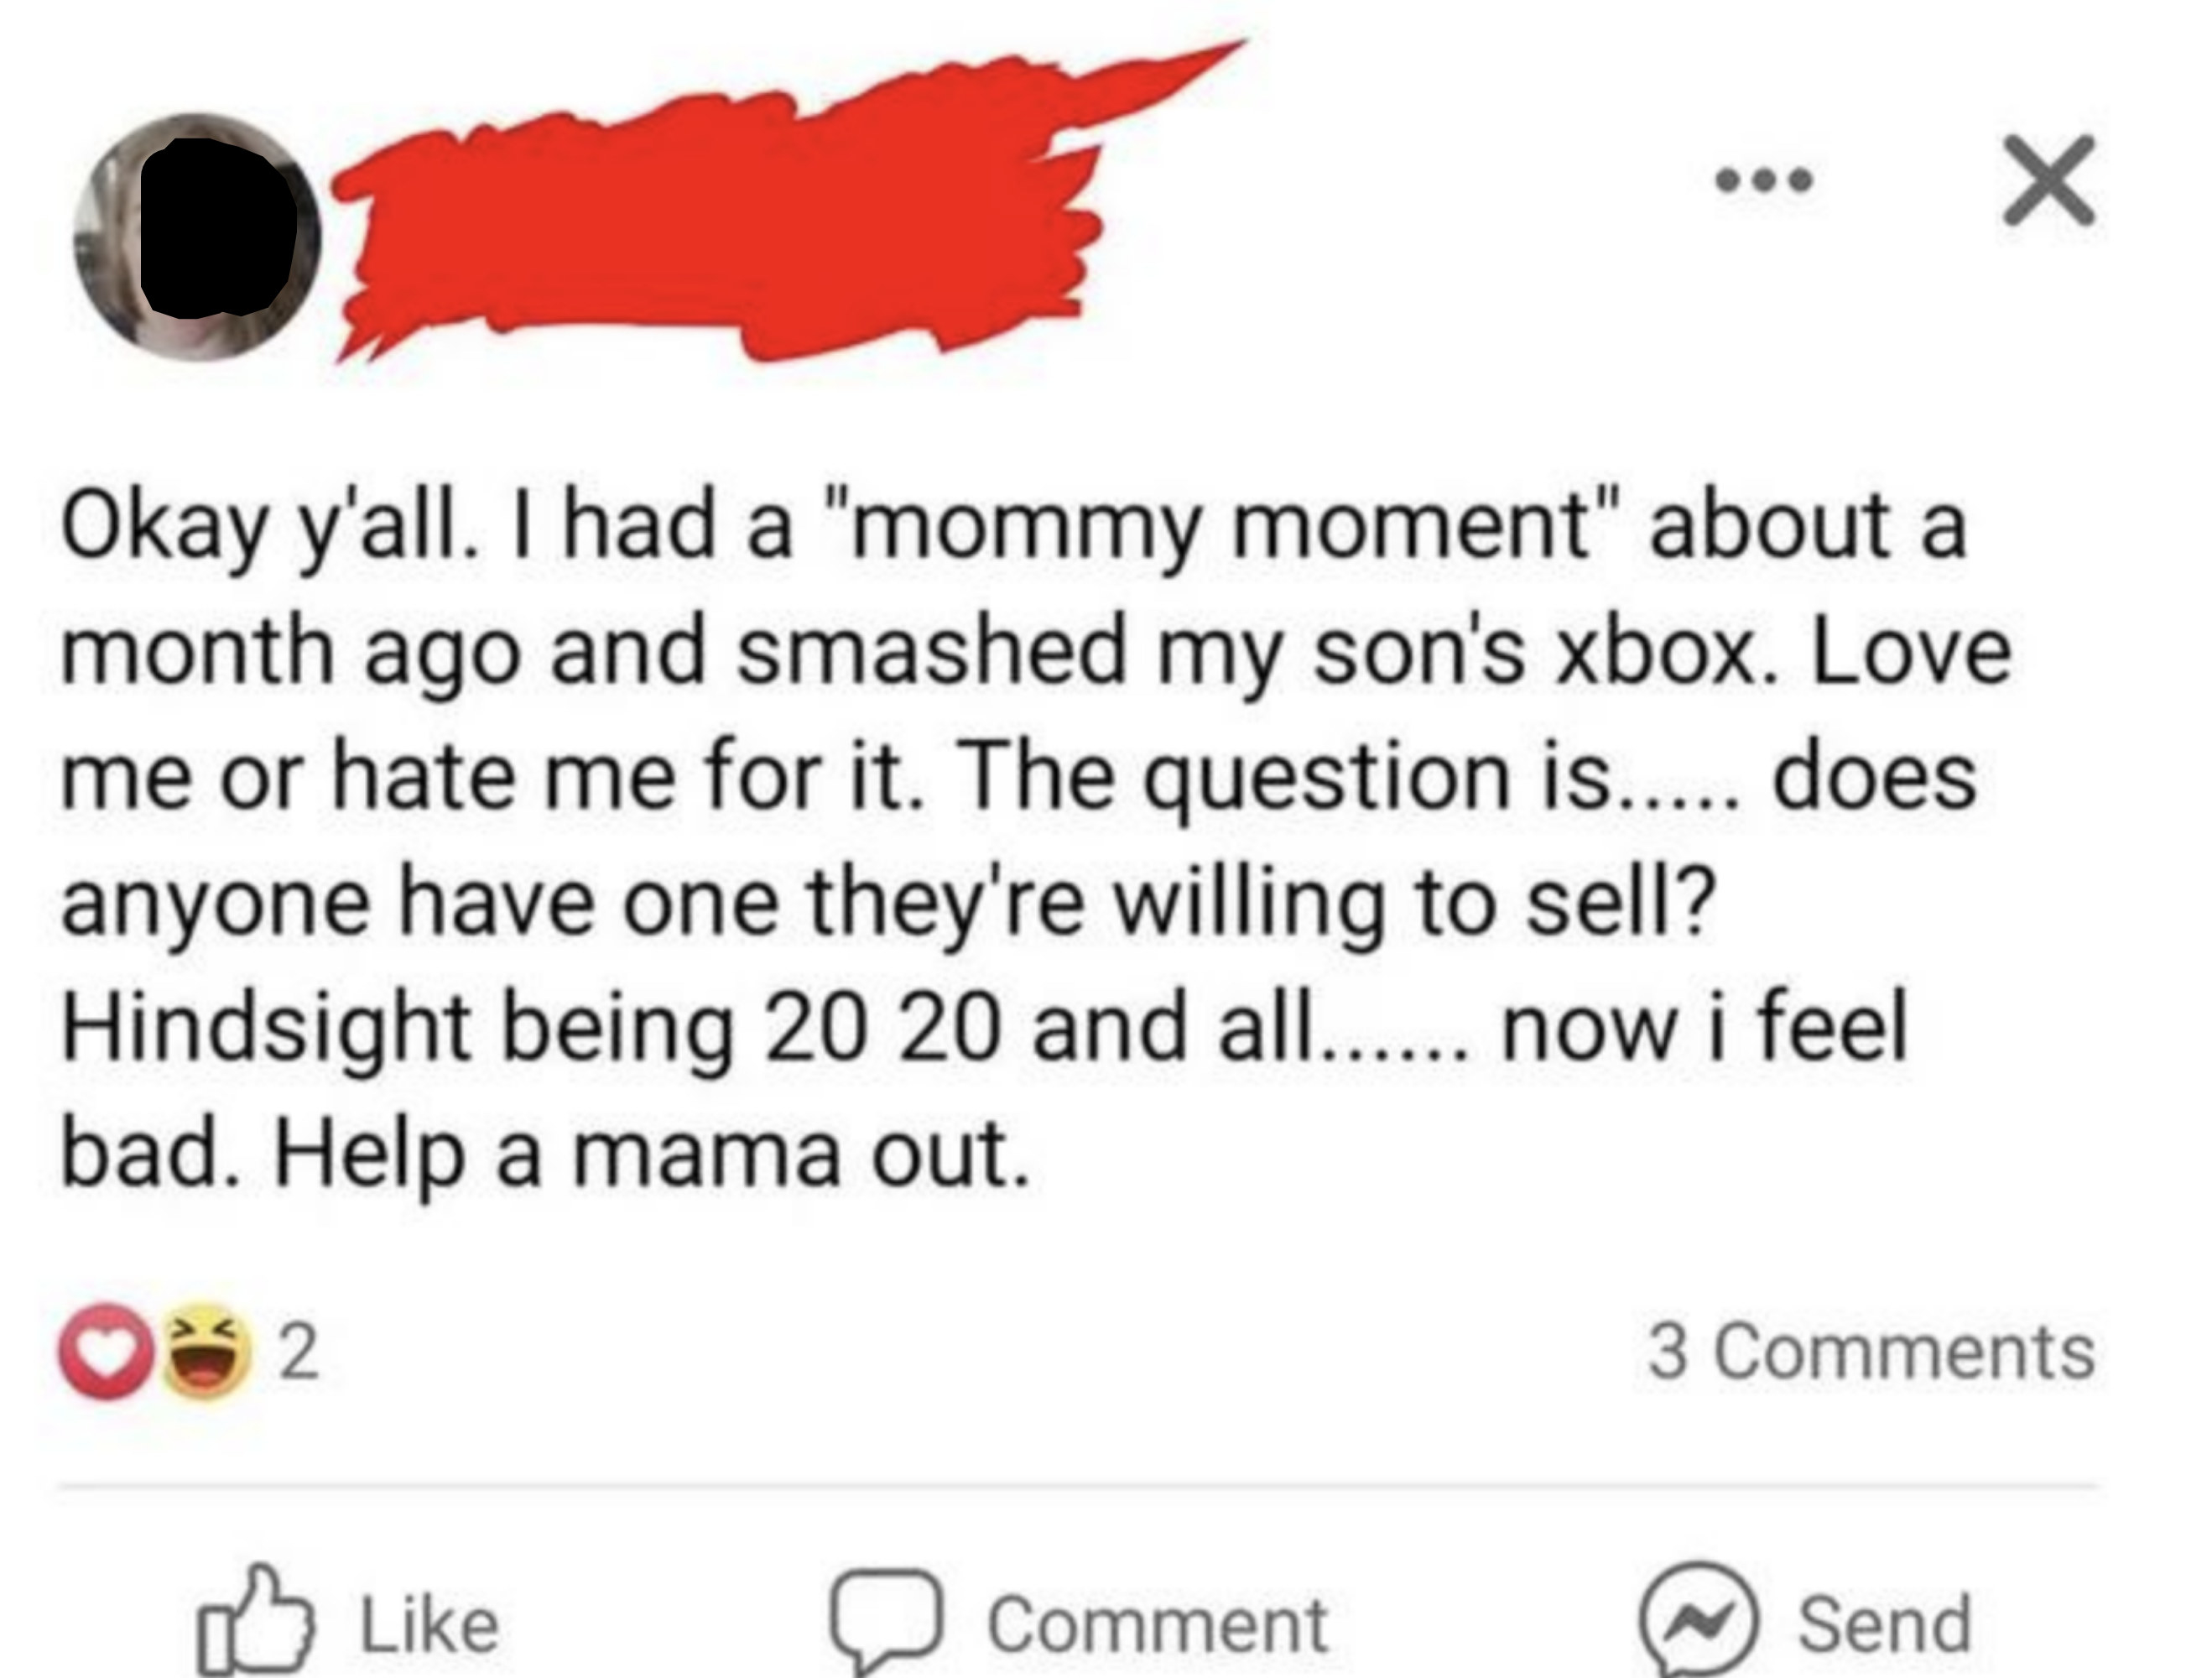 A parent says they had a &quot;mommy moment&quot; and smashed their child&#x27;s XBox and are now looking for a replacement because they feel bad